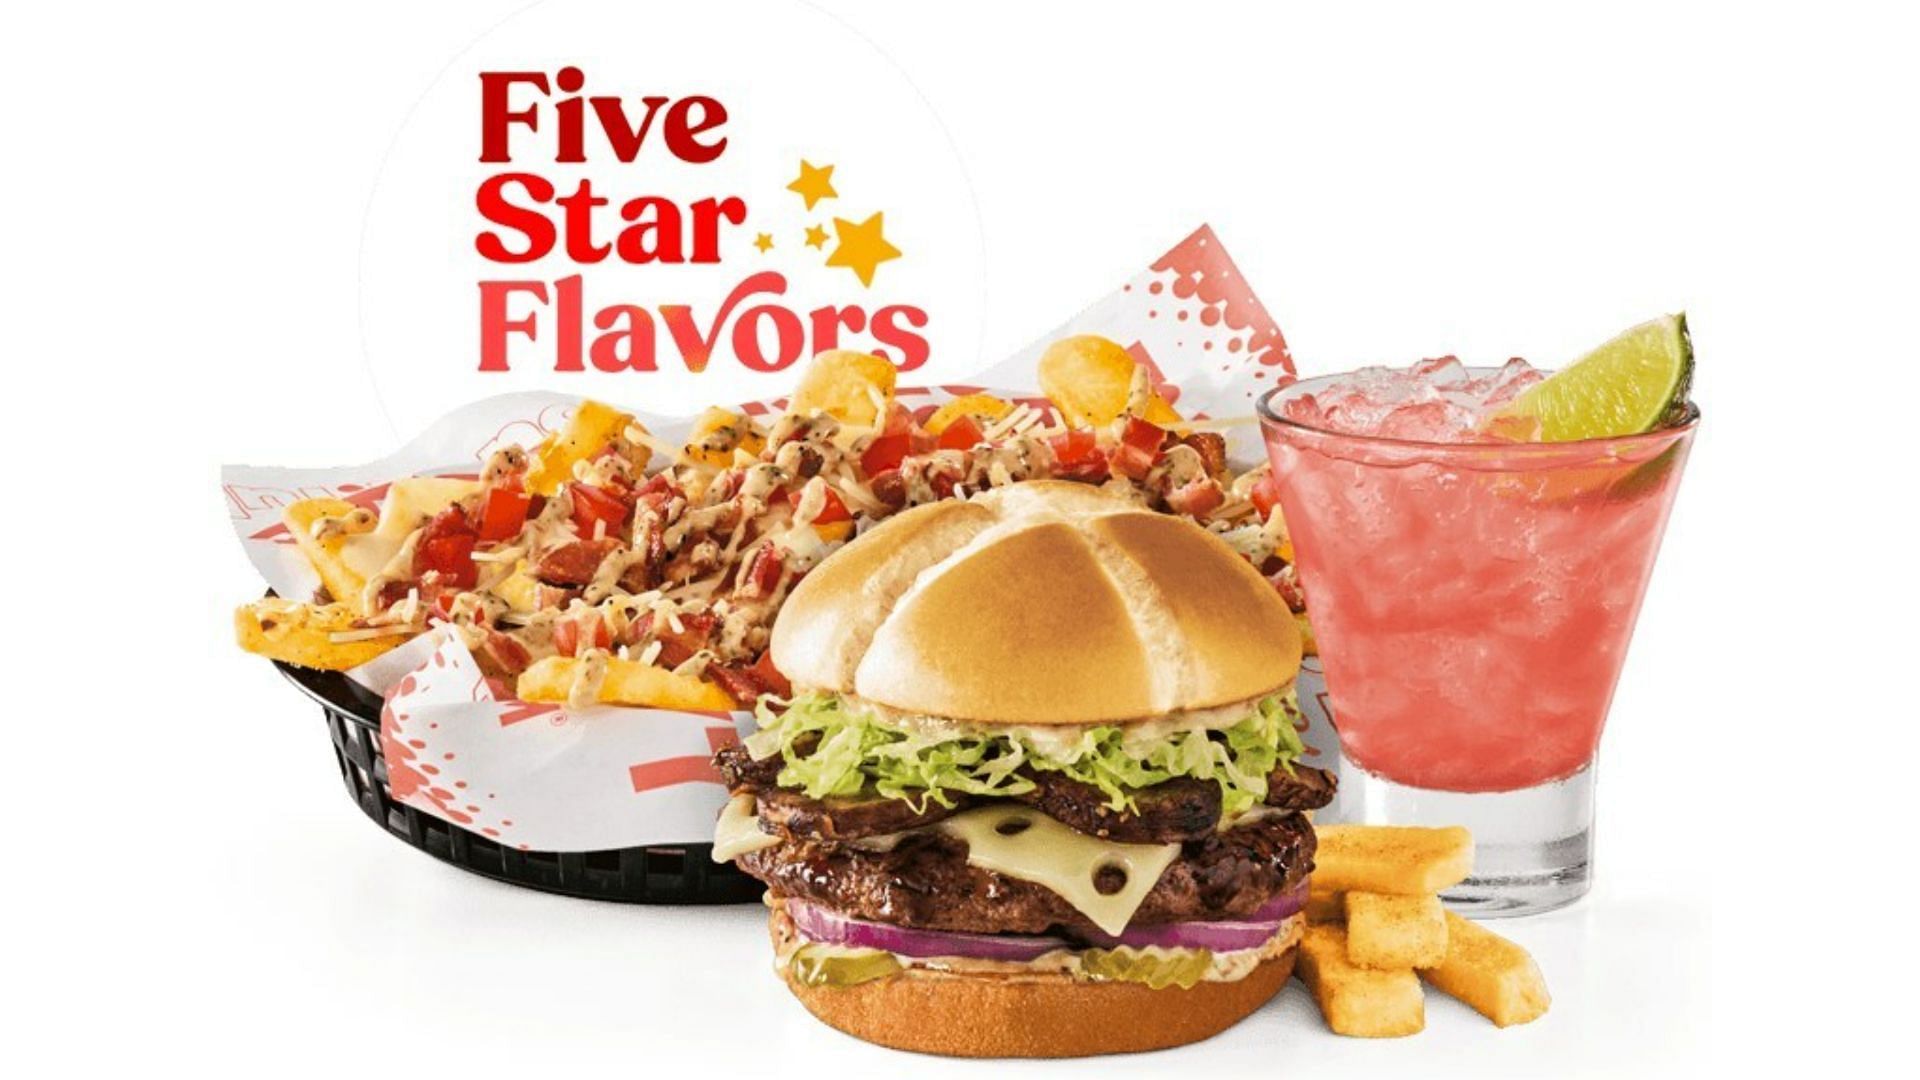 The new Five Star Flavors menu line-up (Image via Red Robin)